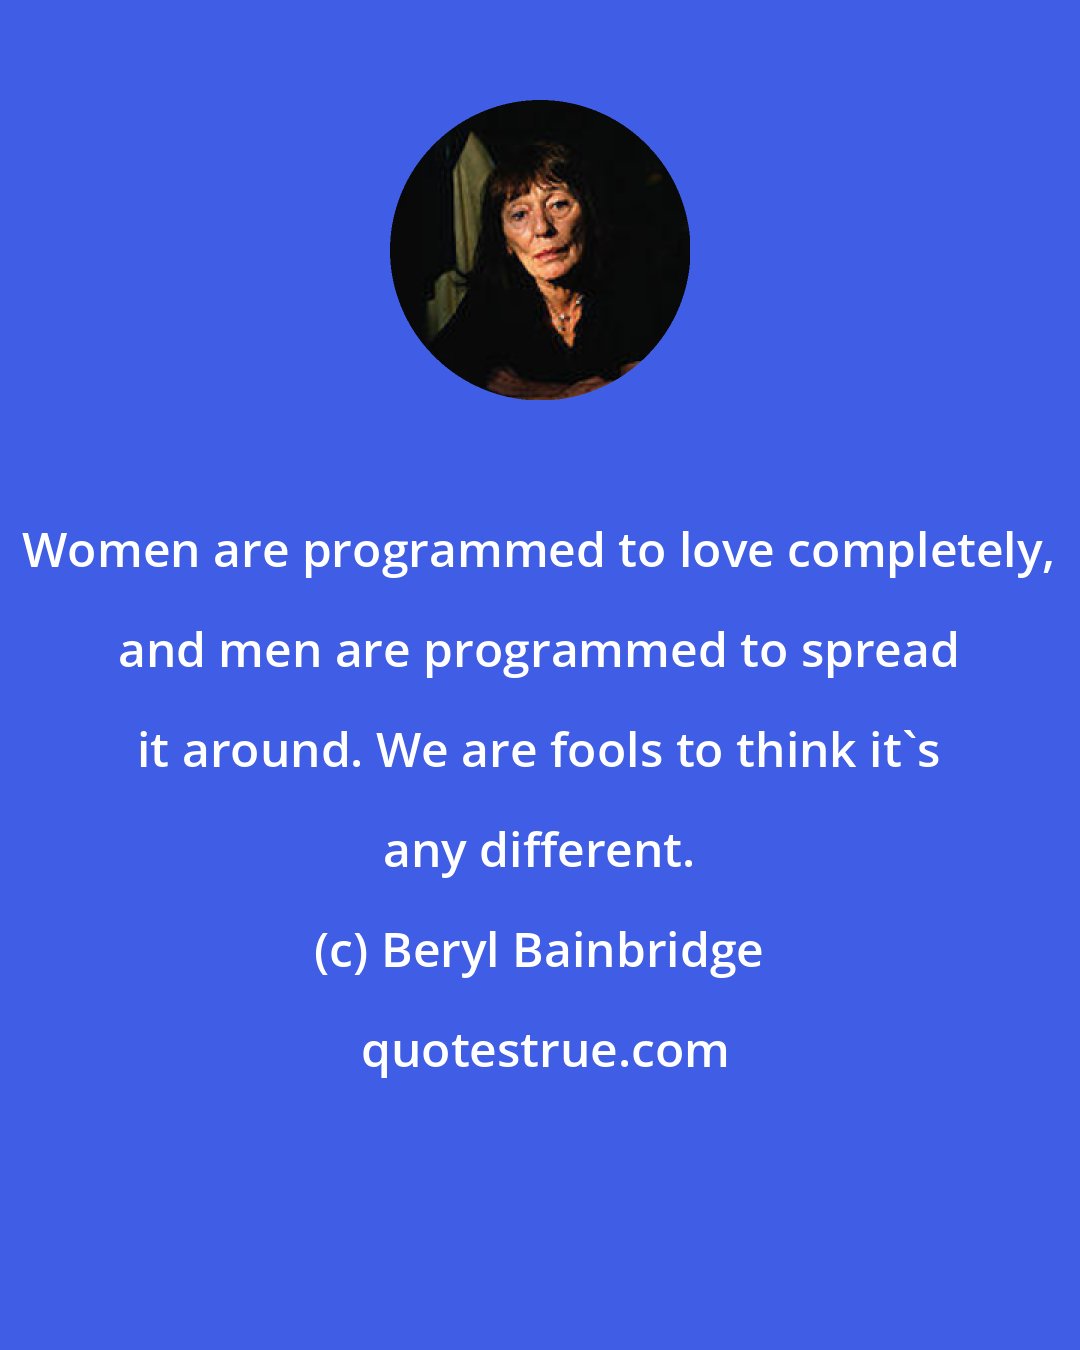 Beryl Bainbridge: Women are programmed to love completely, and men are programmed to spread it around. We are fools to think it's any different.